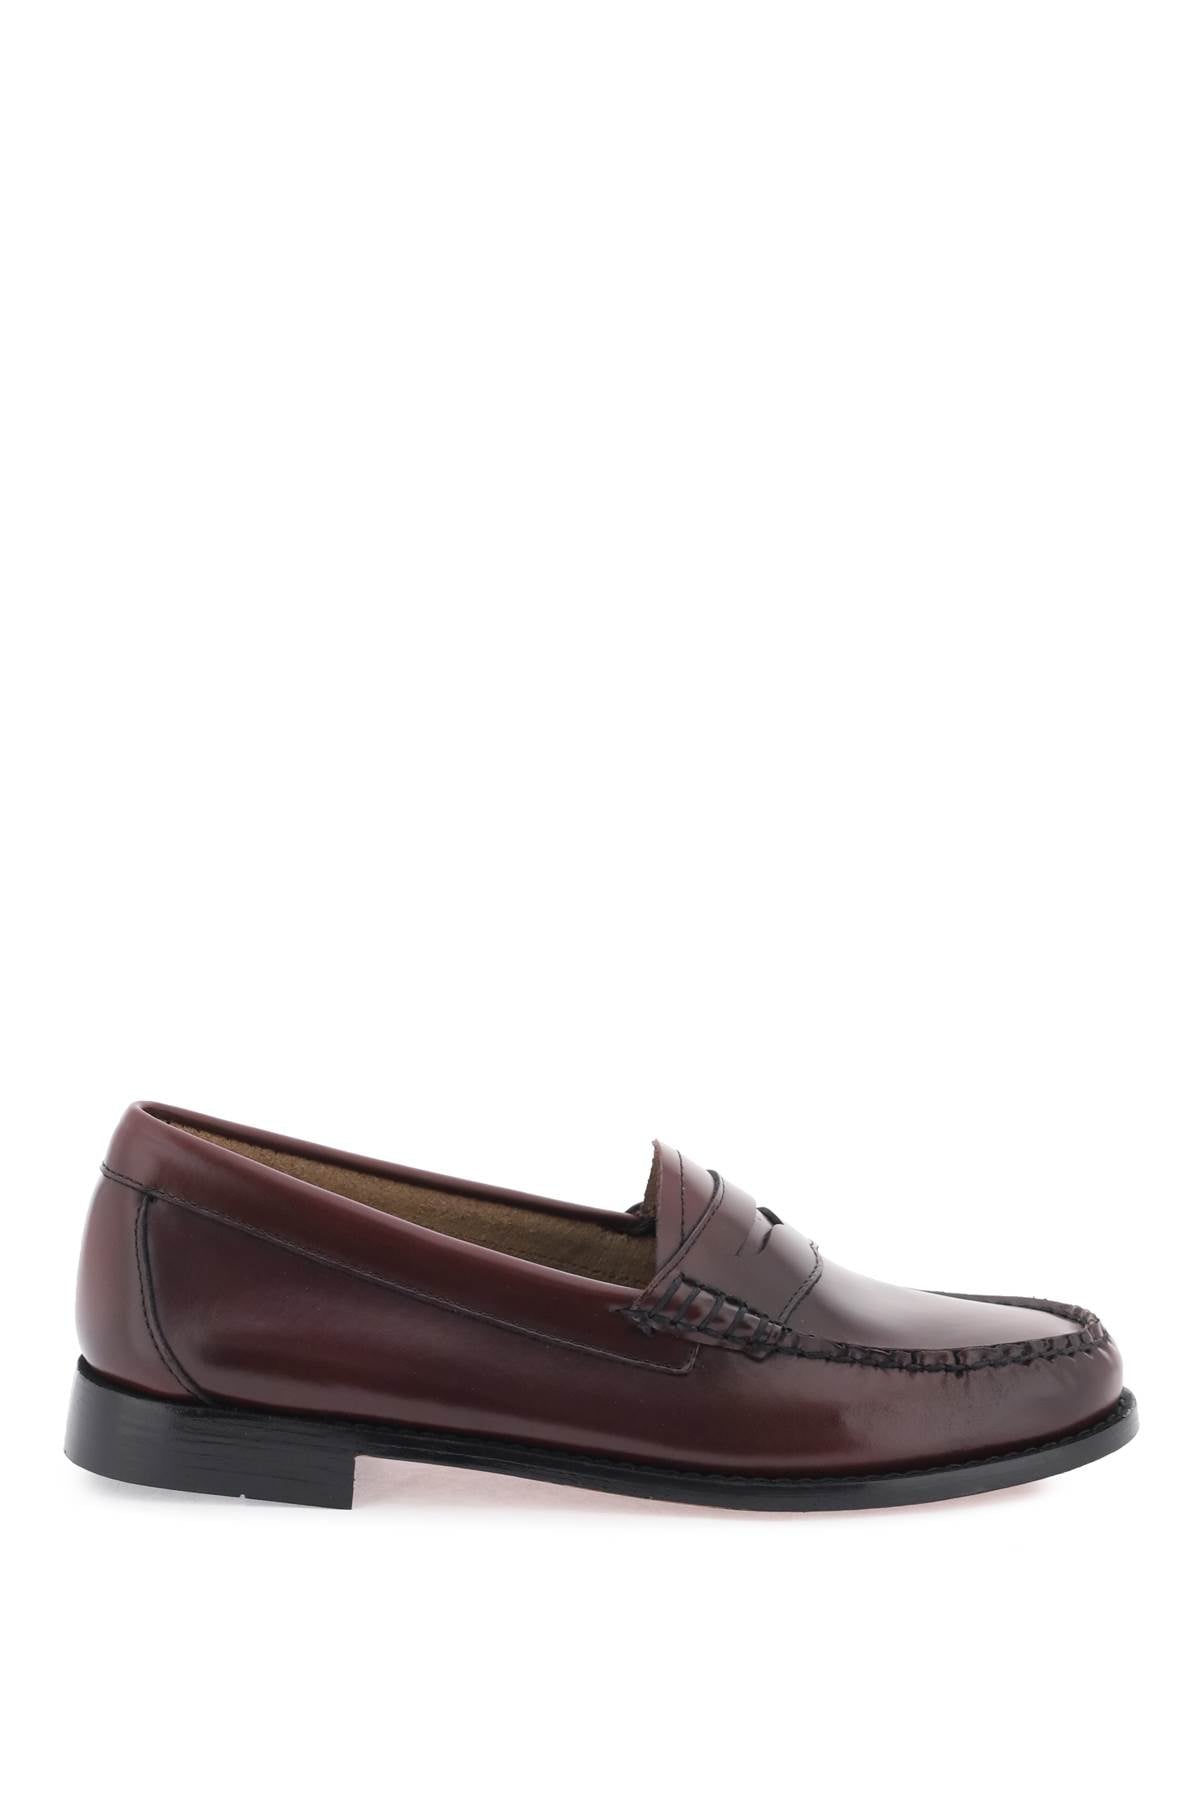 G.h. bass 'weejuns' penny loafers-0